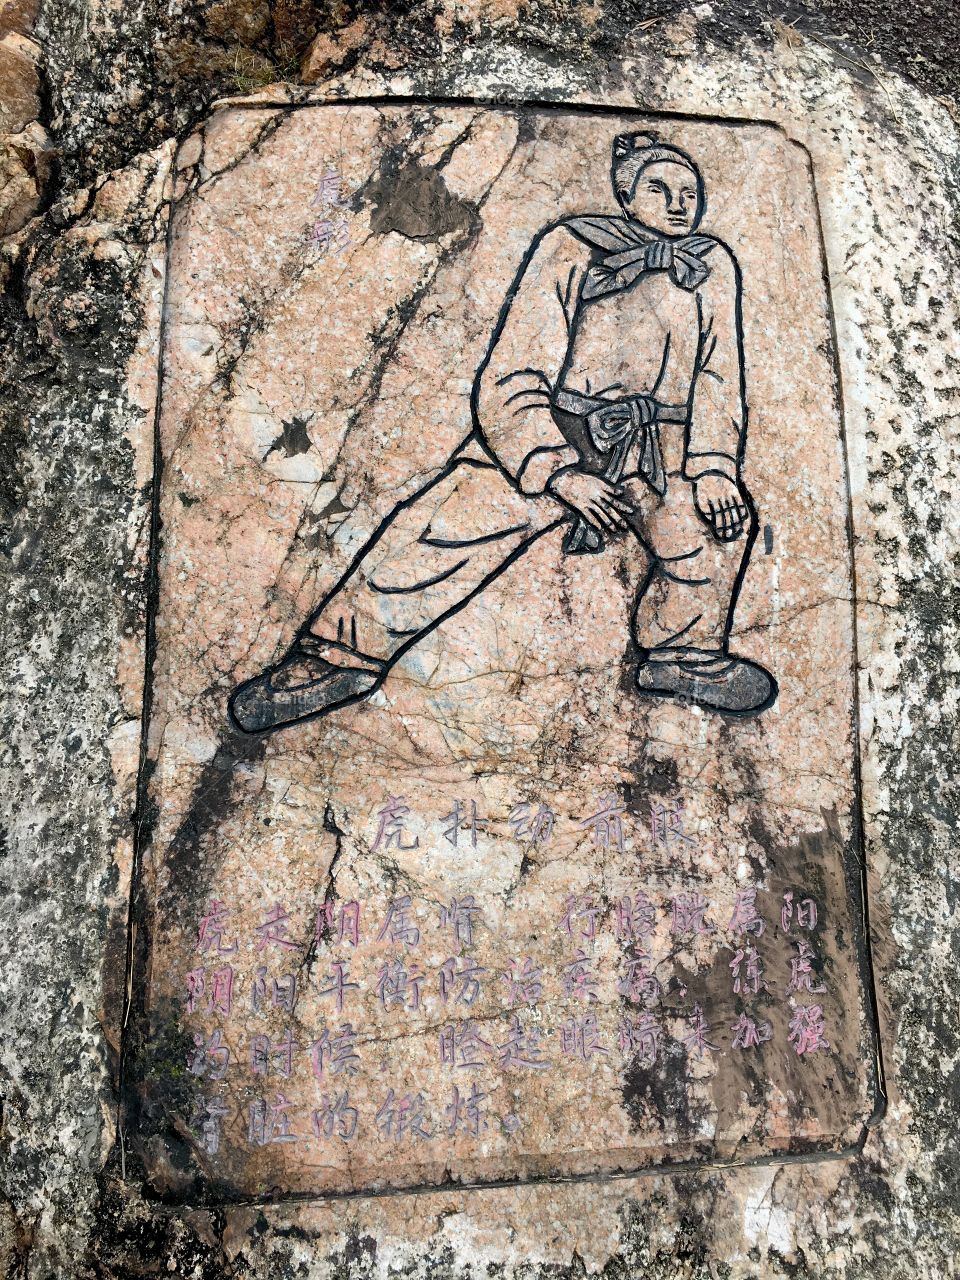 Stone Carving Illustration of Chinese Kung Fu Fighters - Martial Artists on Nanshan Mountain